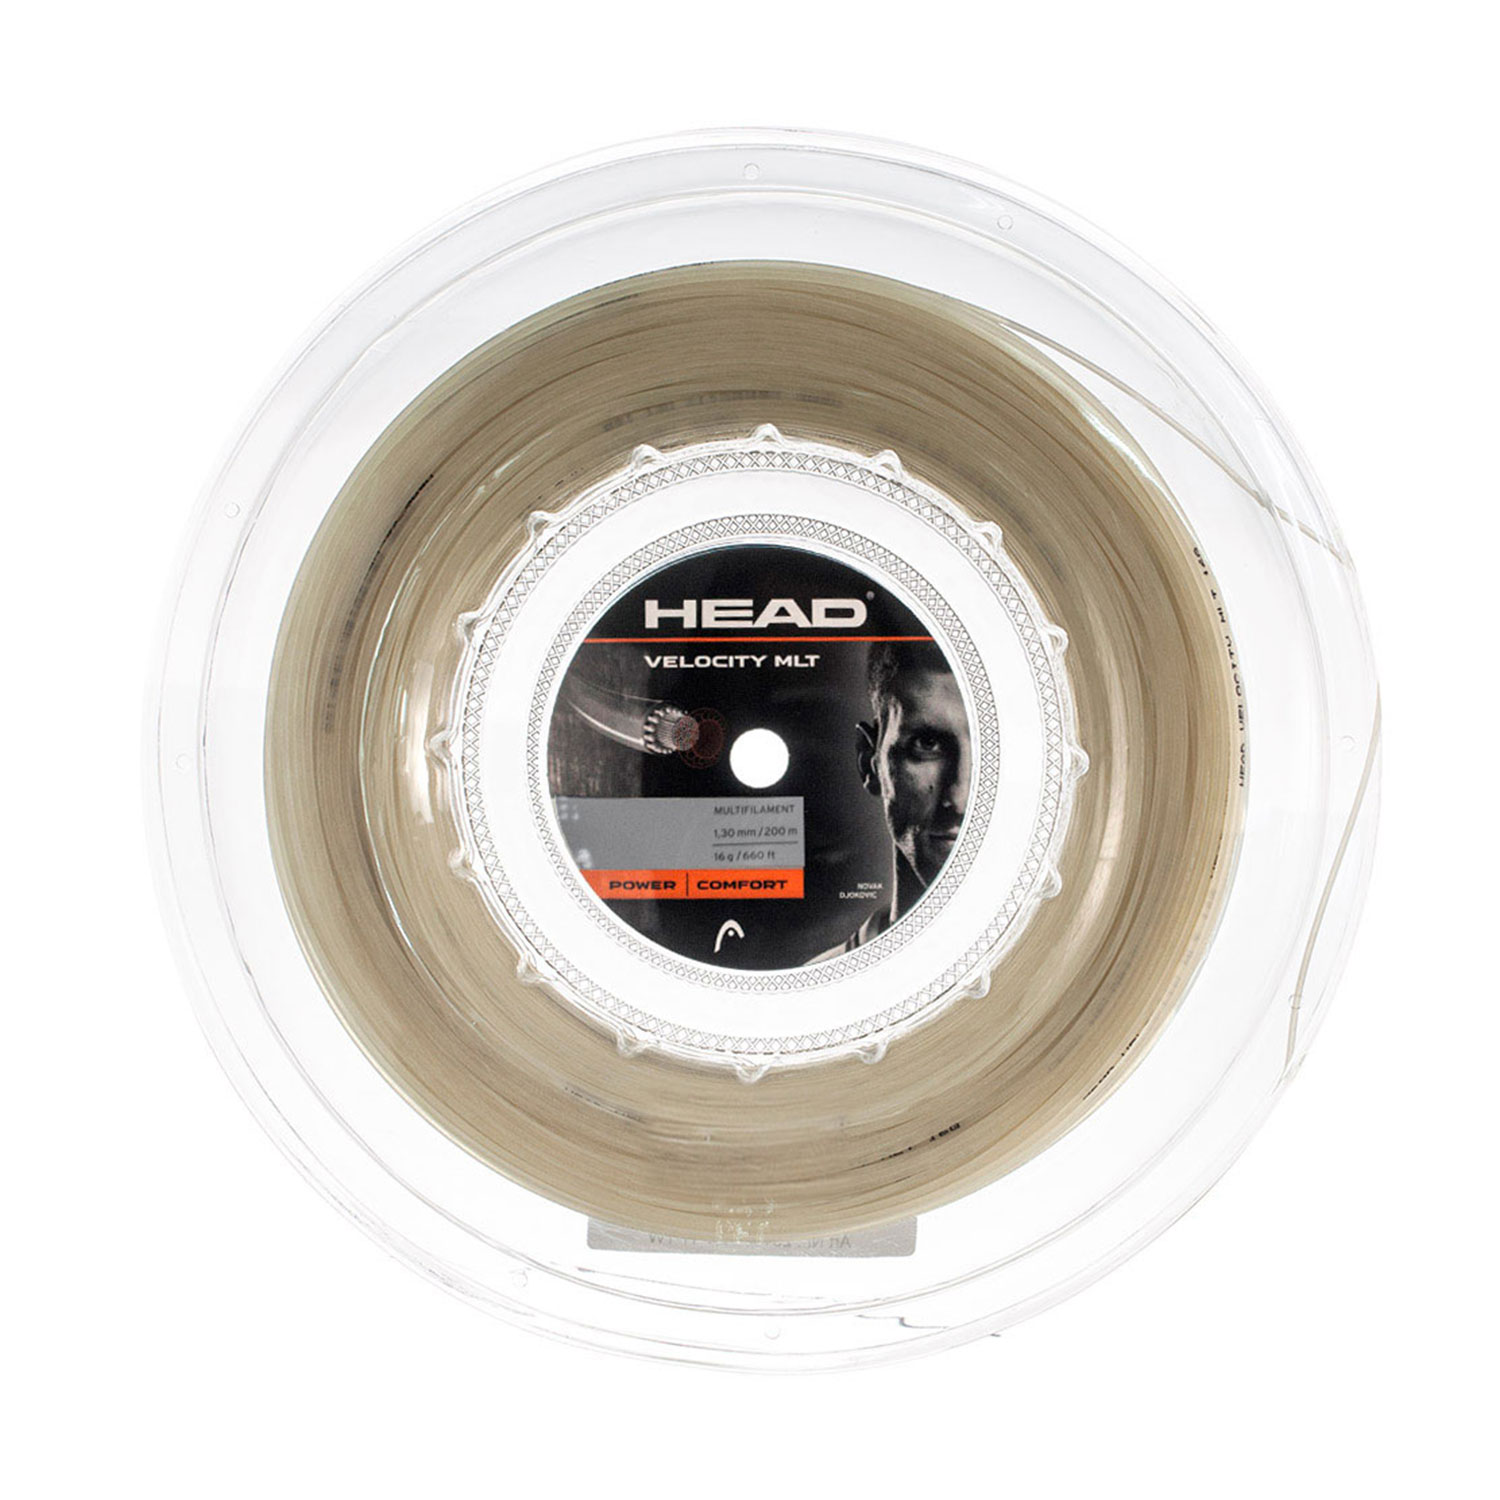 Head MultiPower Velocity 1.30 200 m Reel - Natural